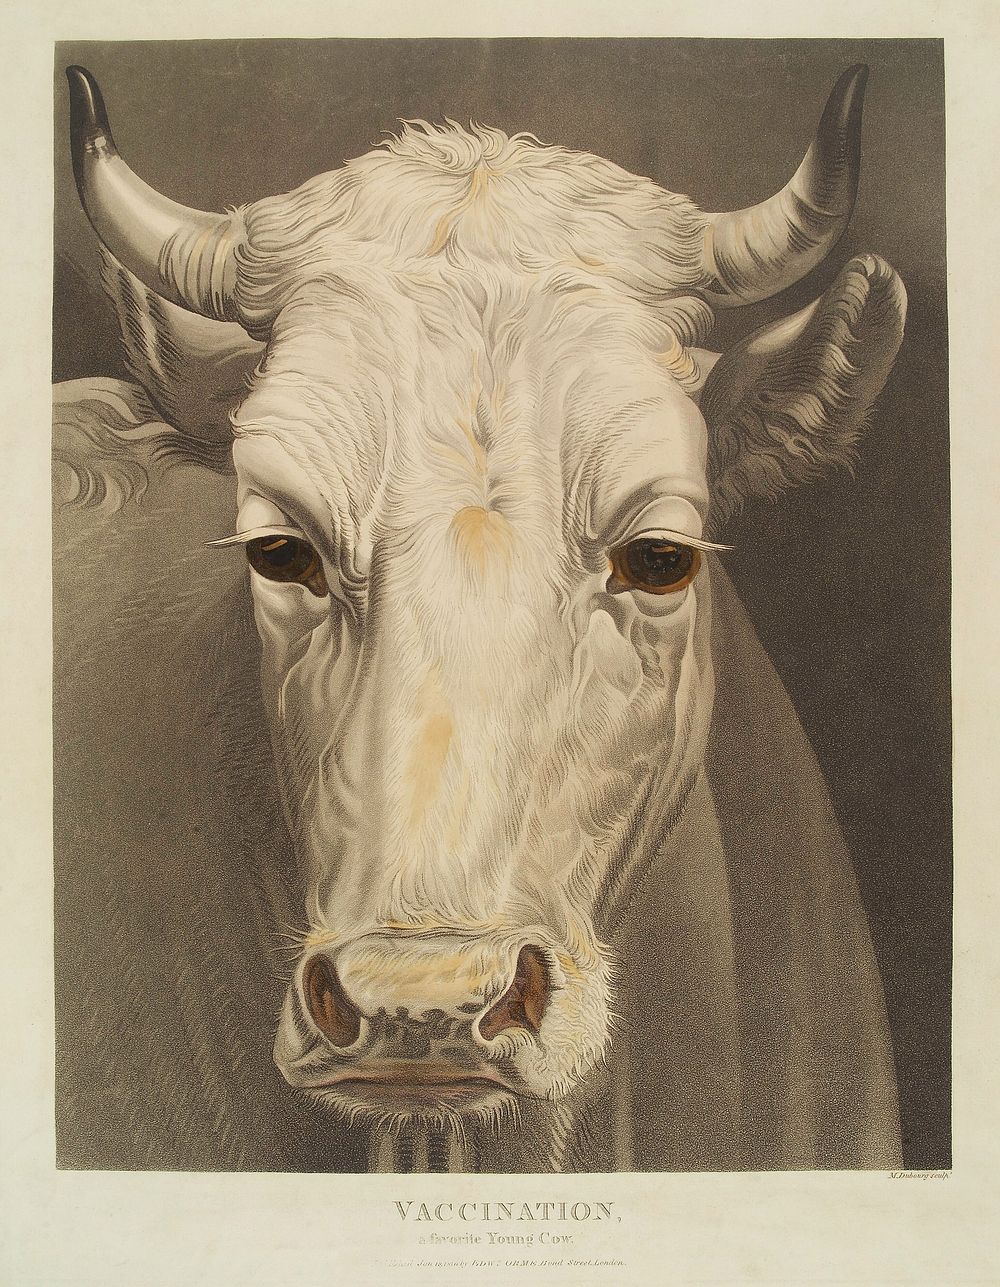 A cow named "Vaccination". Coloured aquatint by M. Dubourg, 1810.